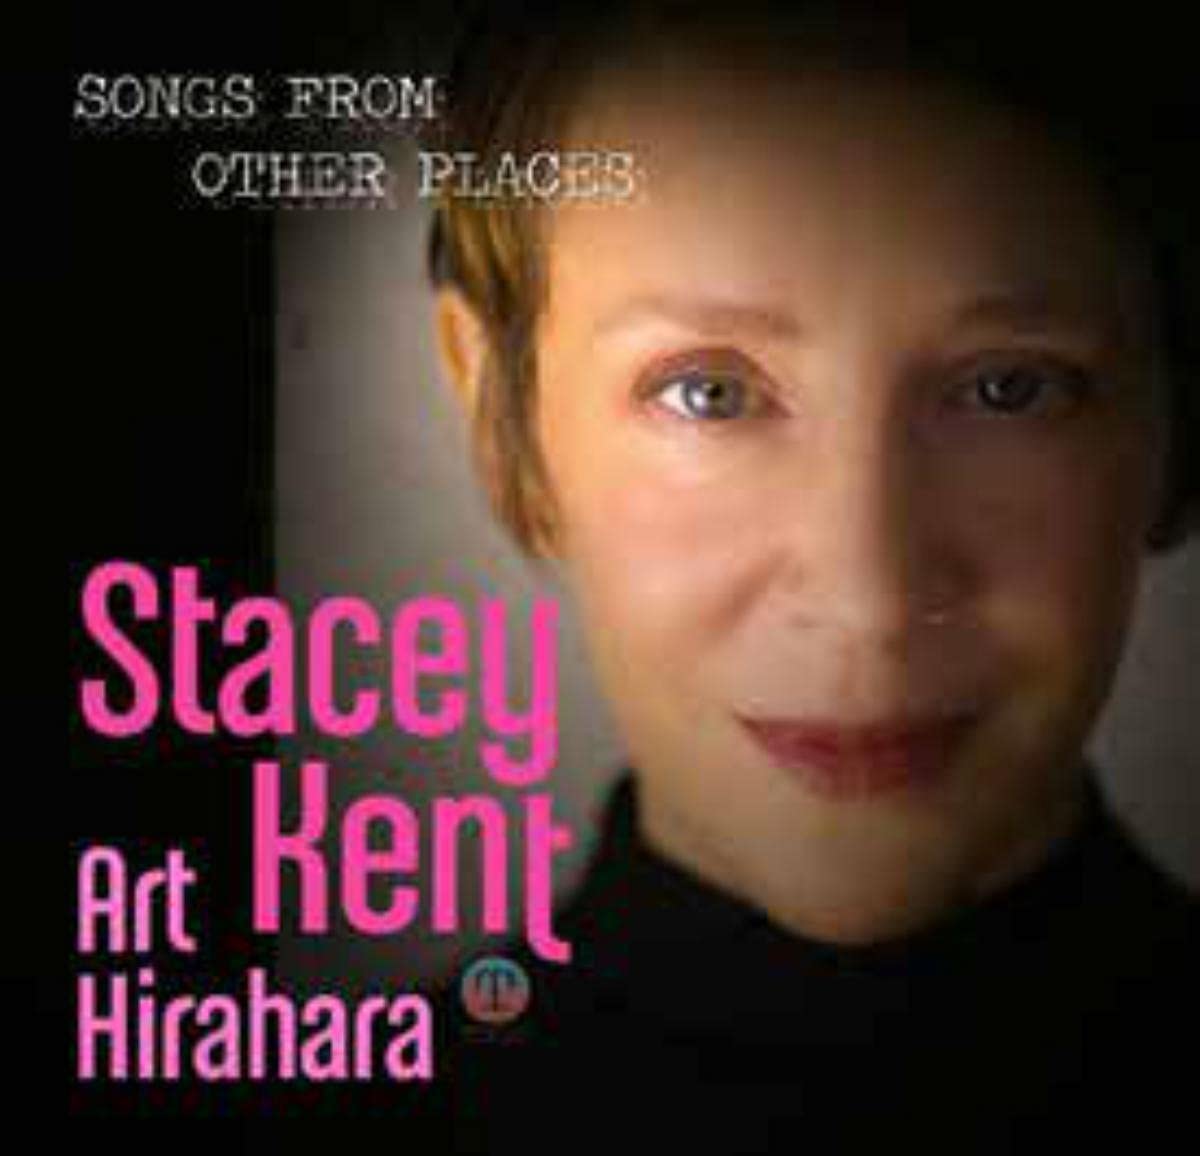 STACEY KENT - Songs From Other Places cover 